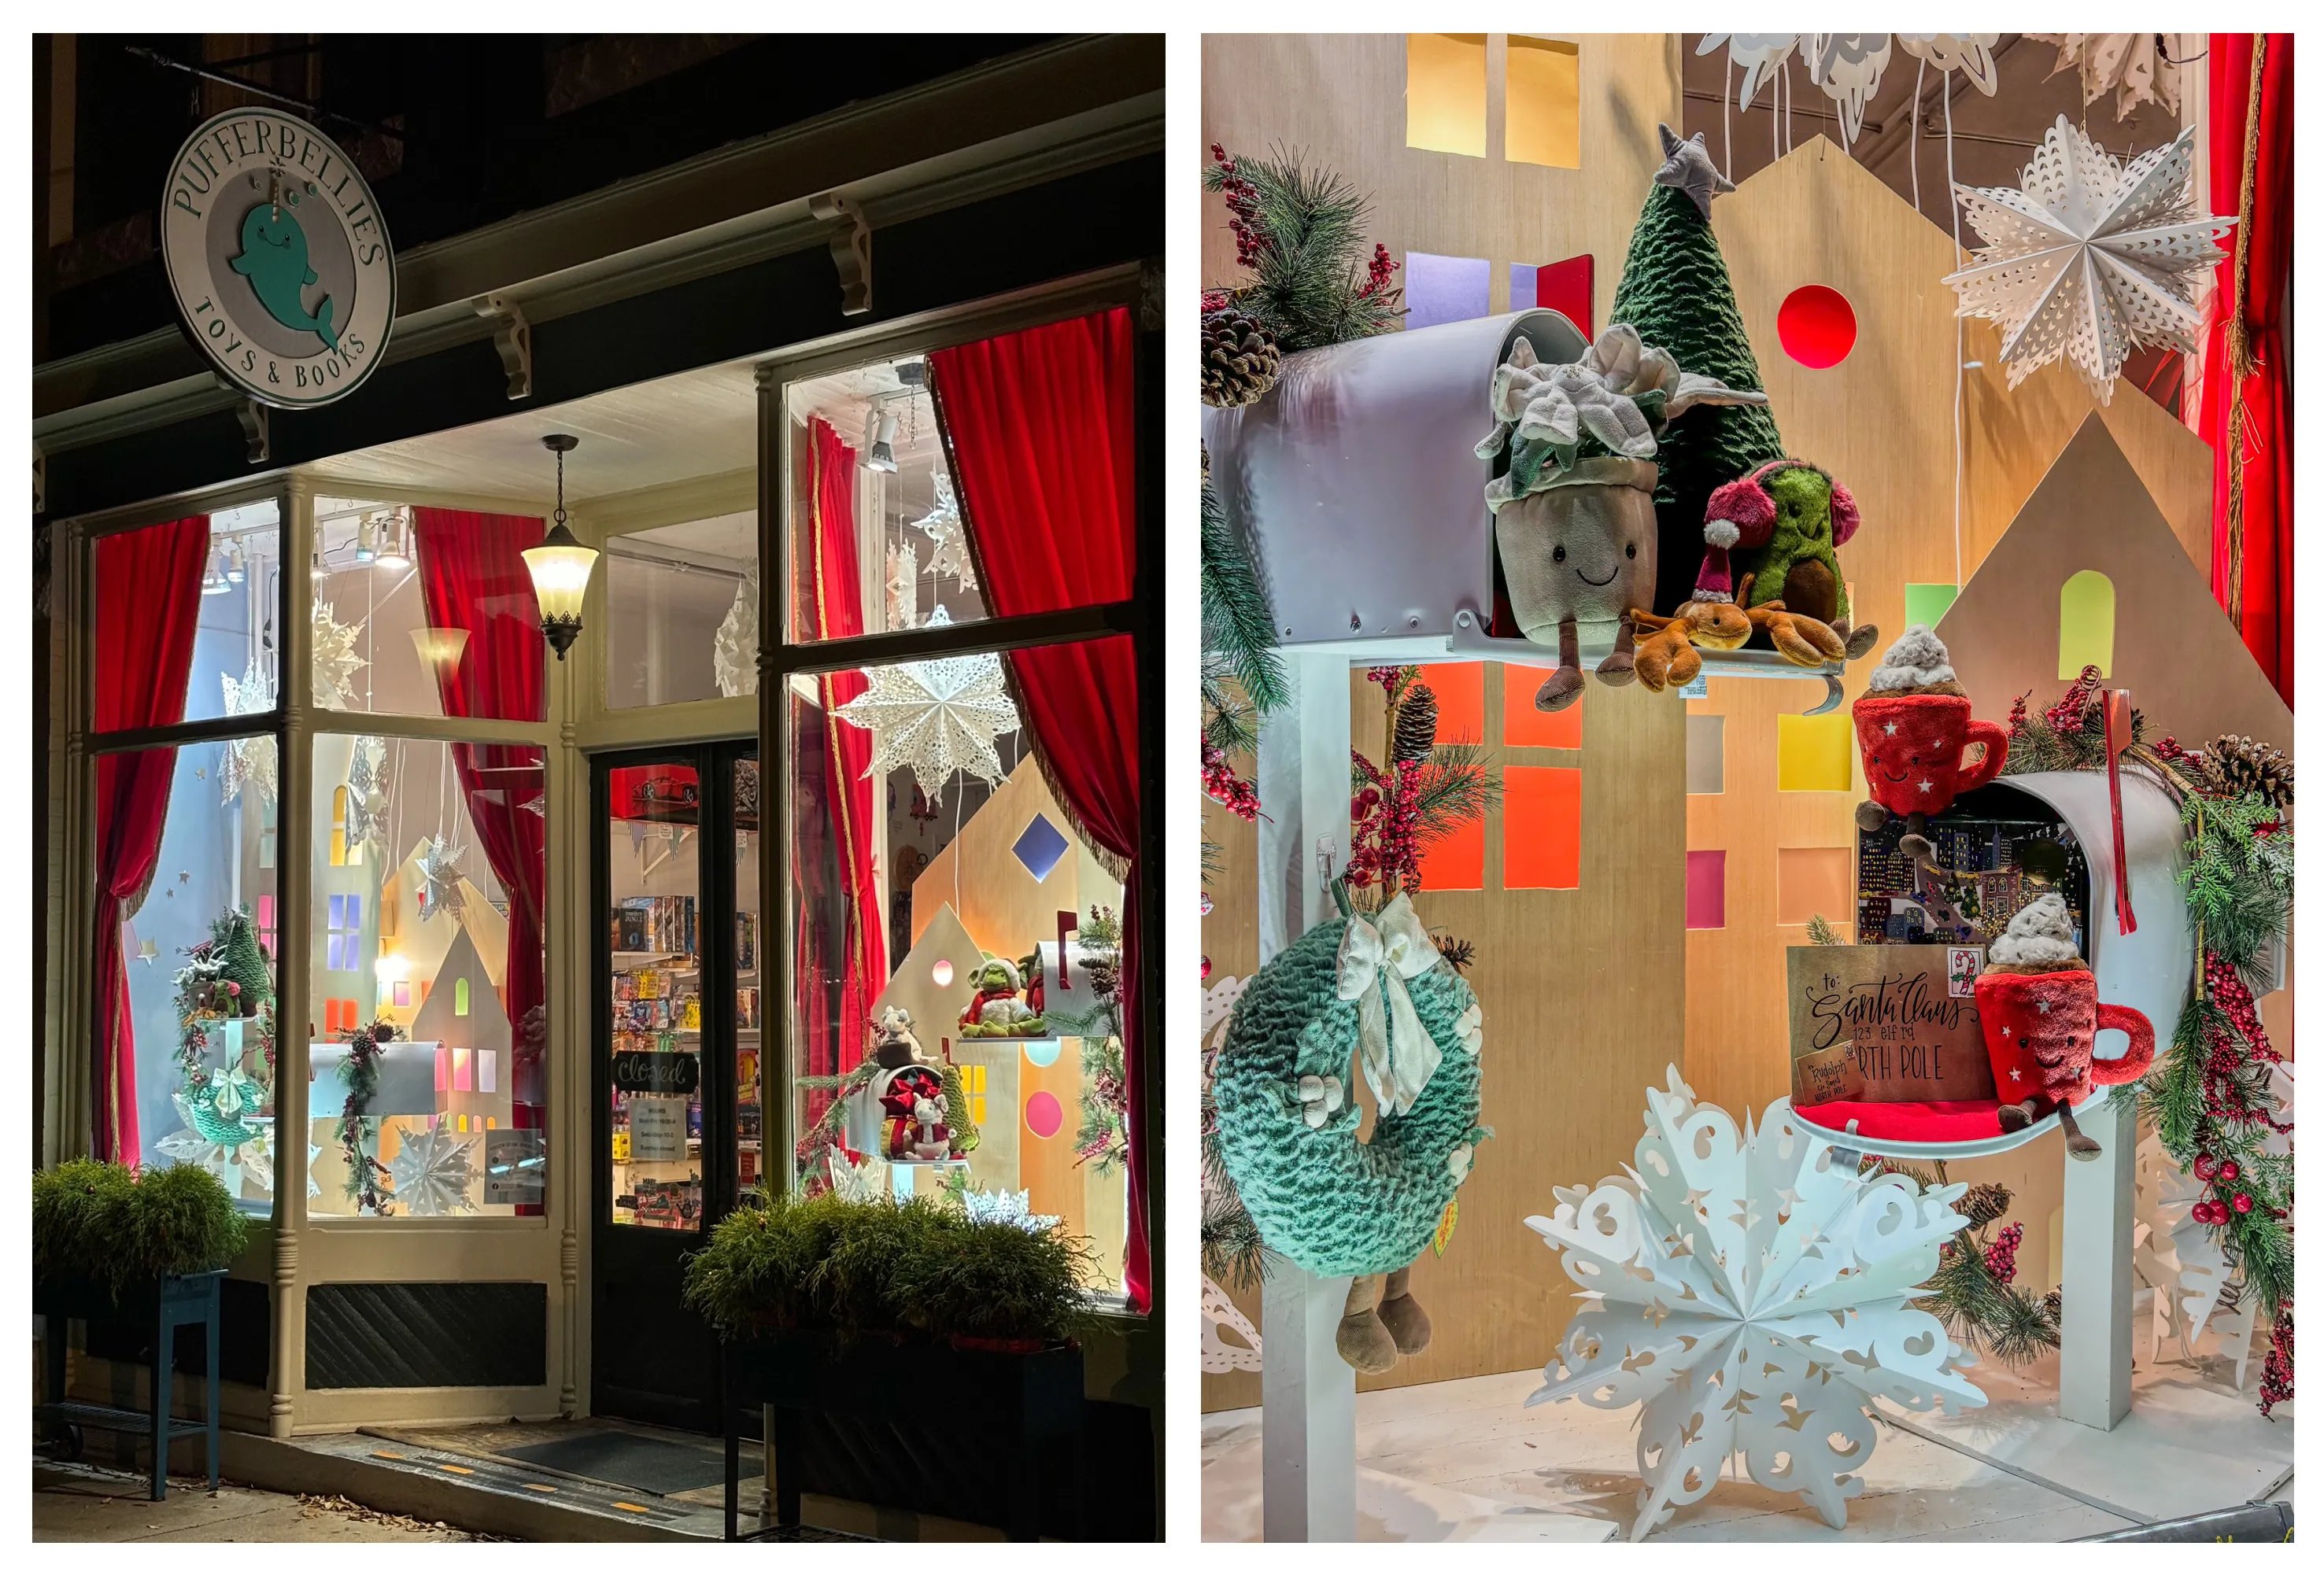 How to paint your next window display – Retail Design Blog